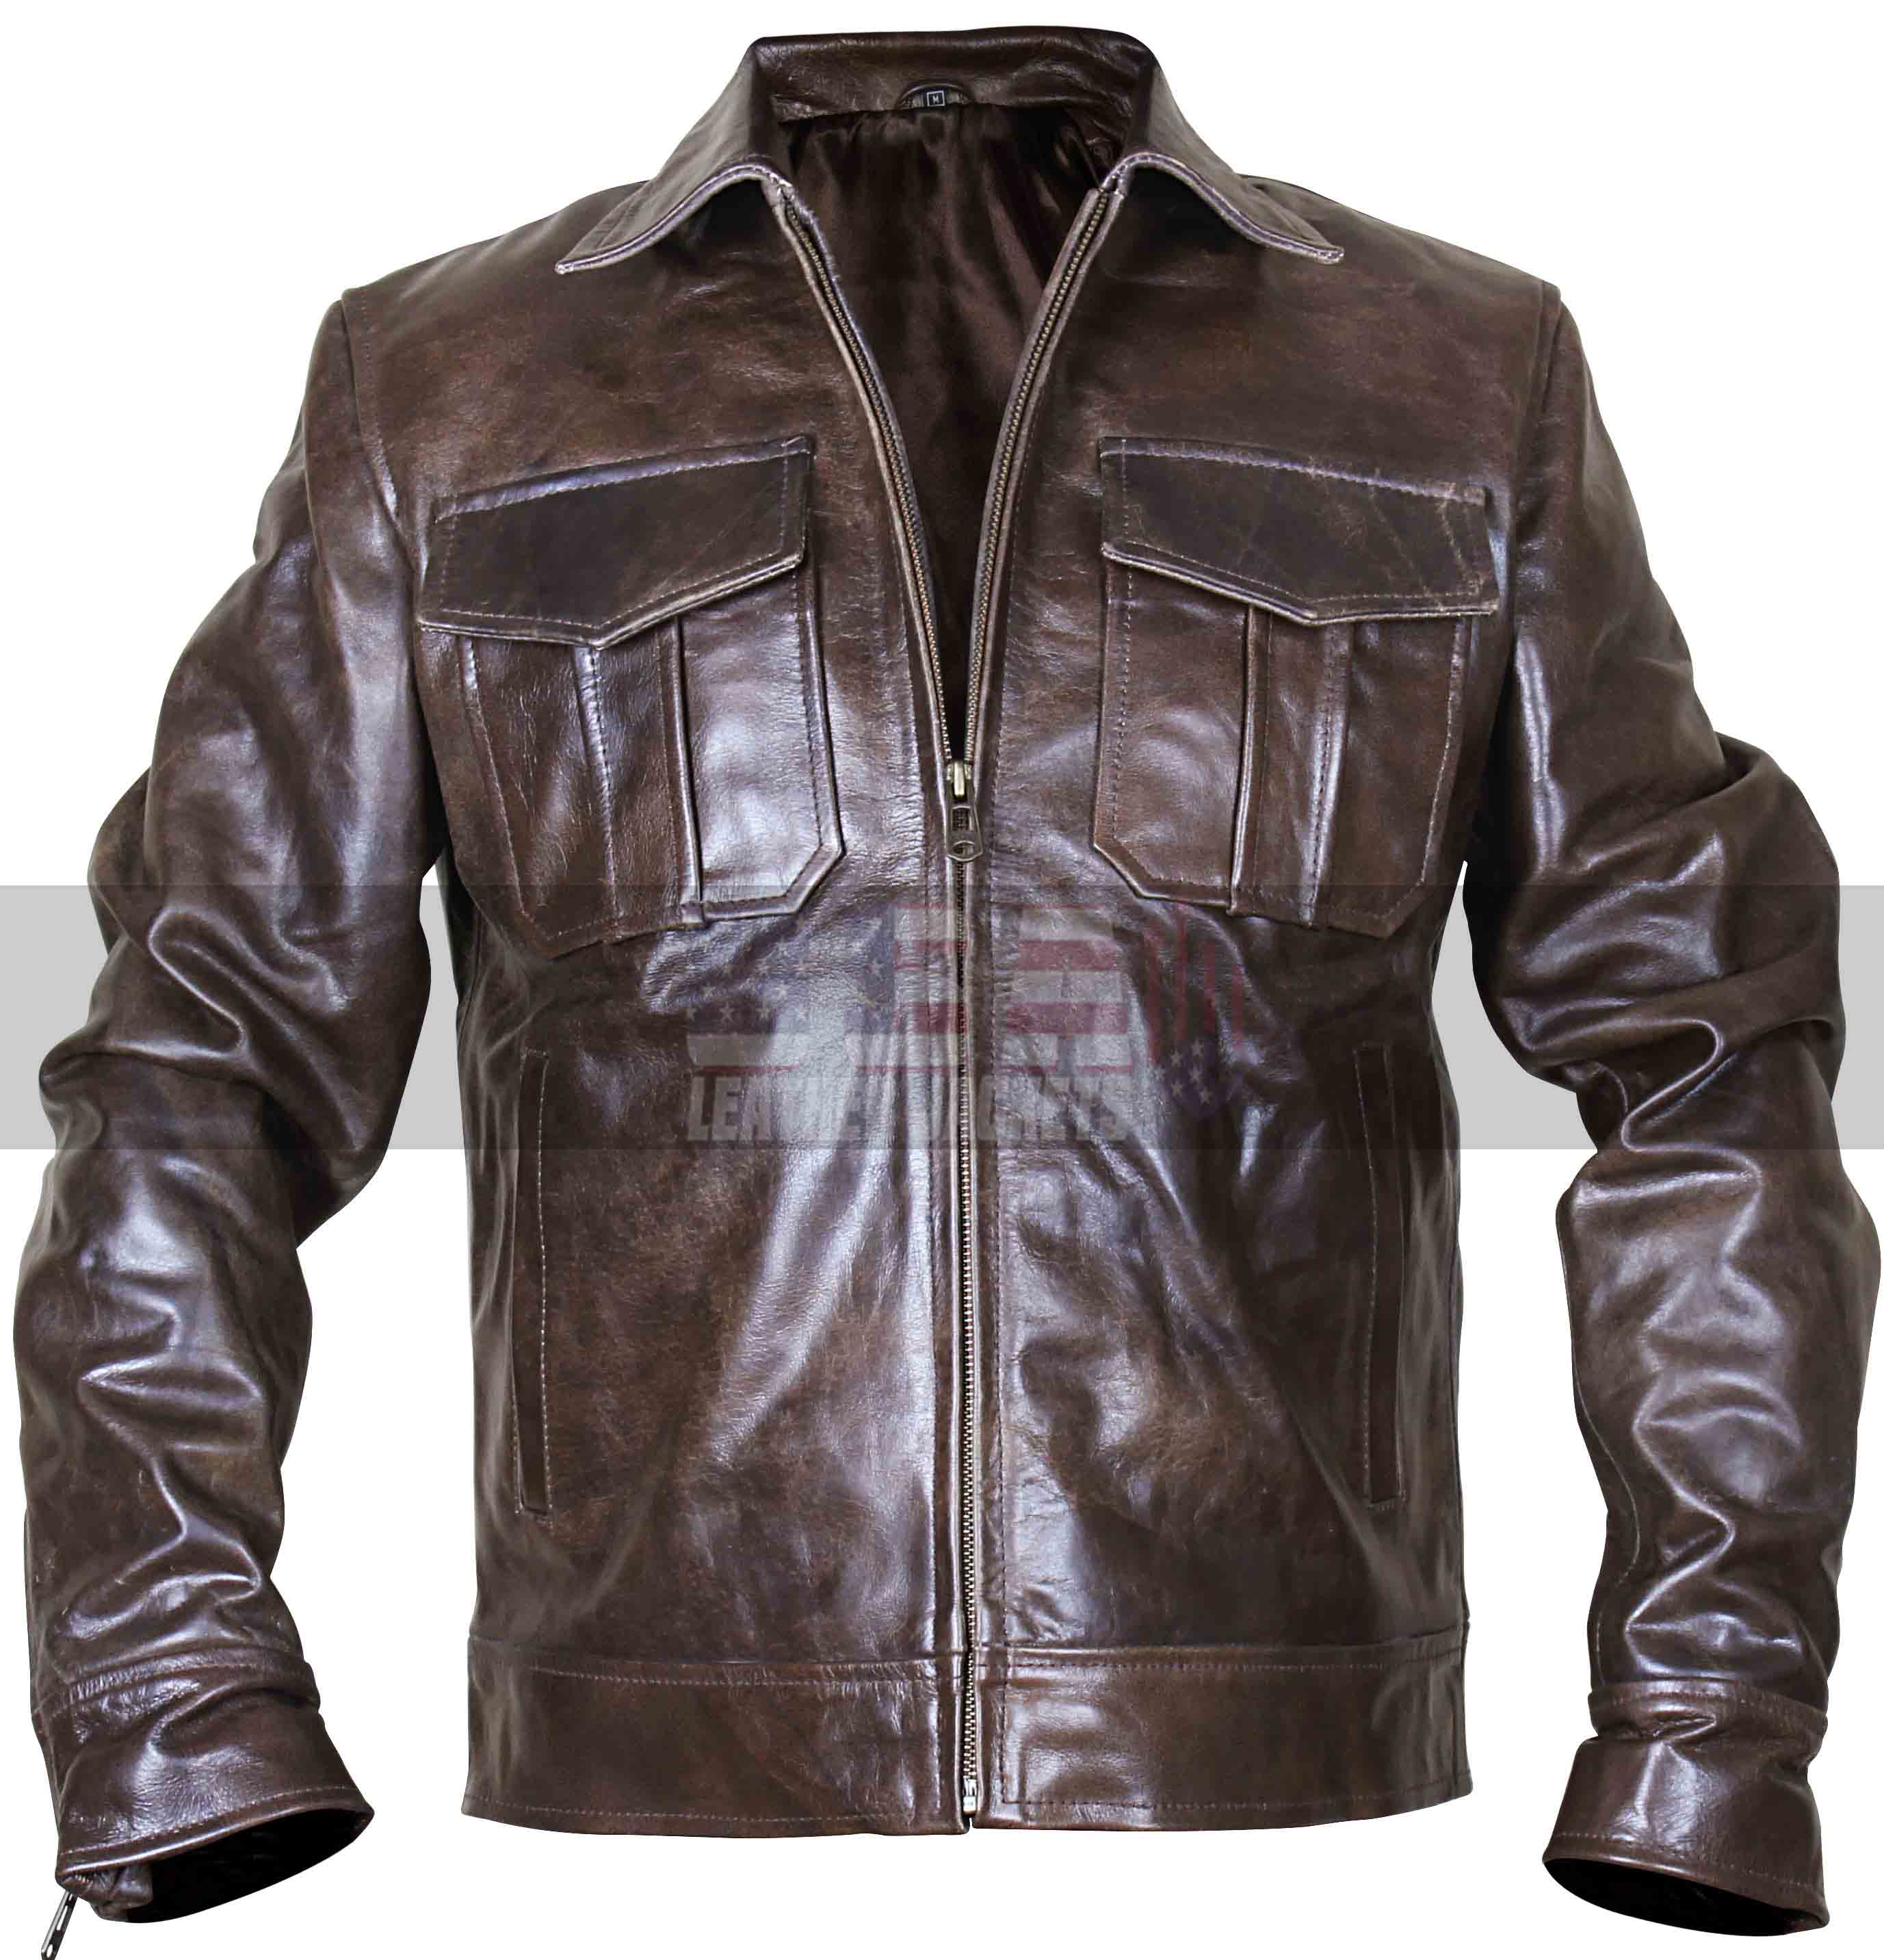 Copper Classic Rub Off Vintage Biker Style Brown Leather Jacket